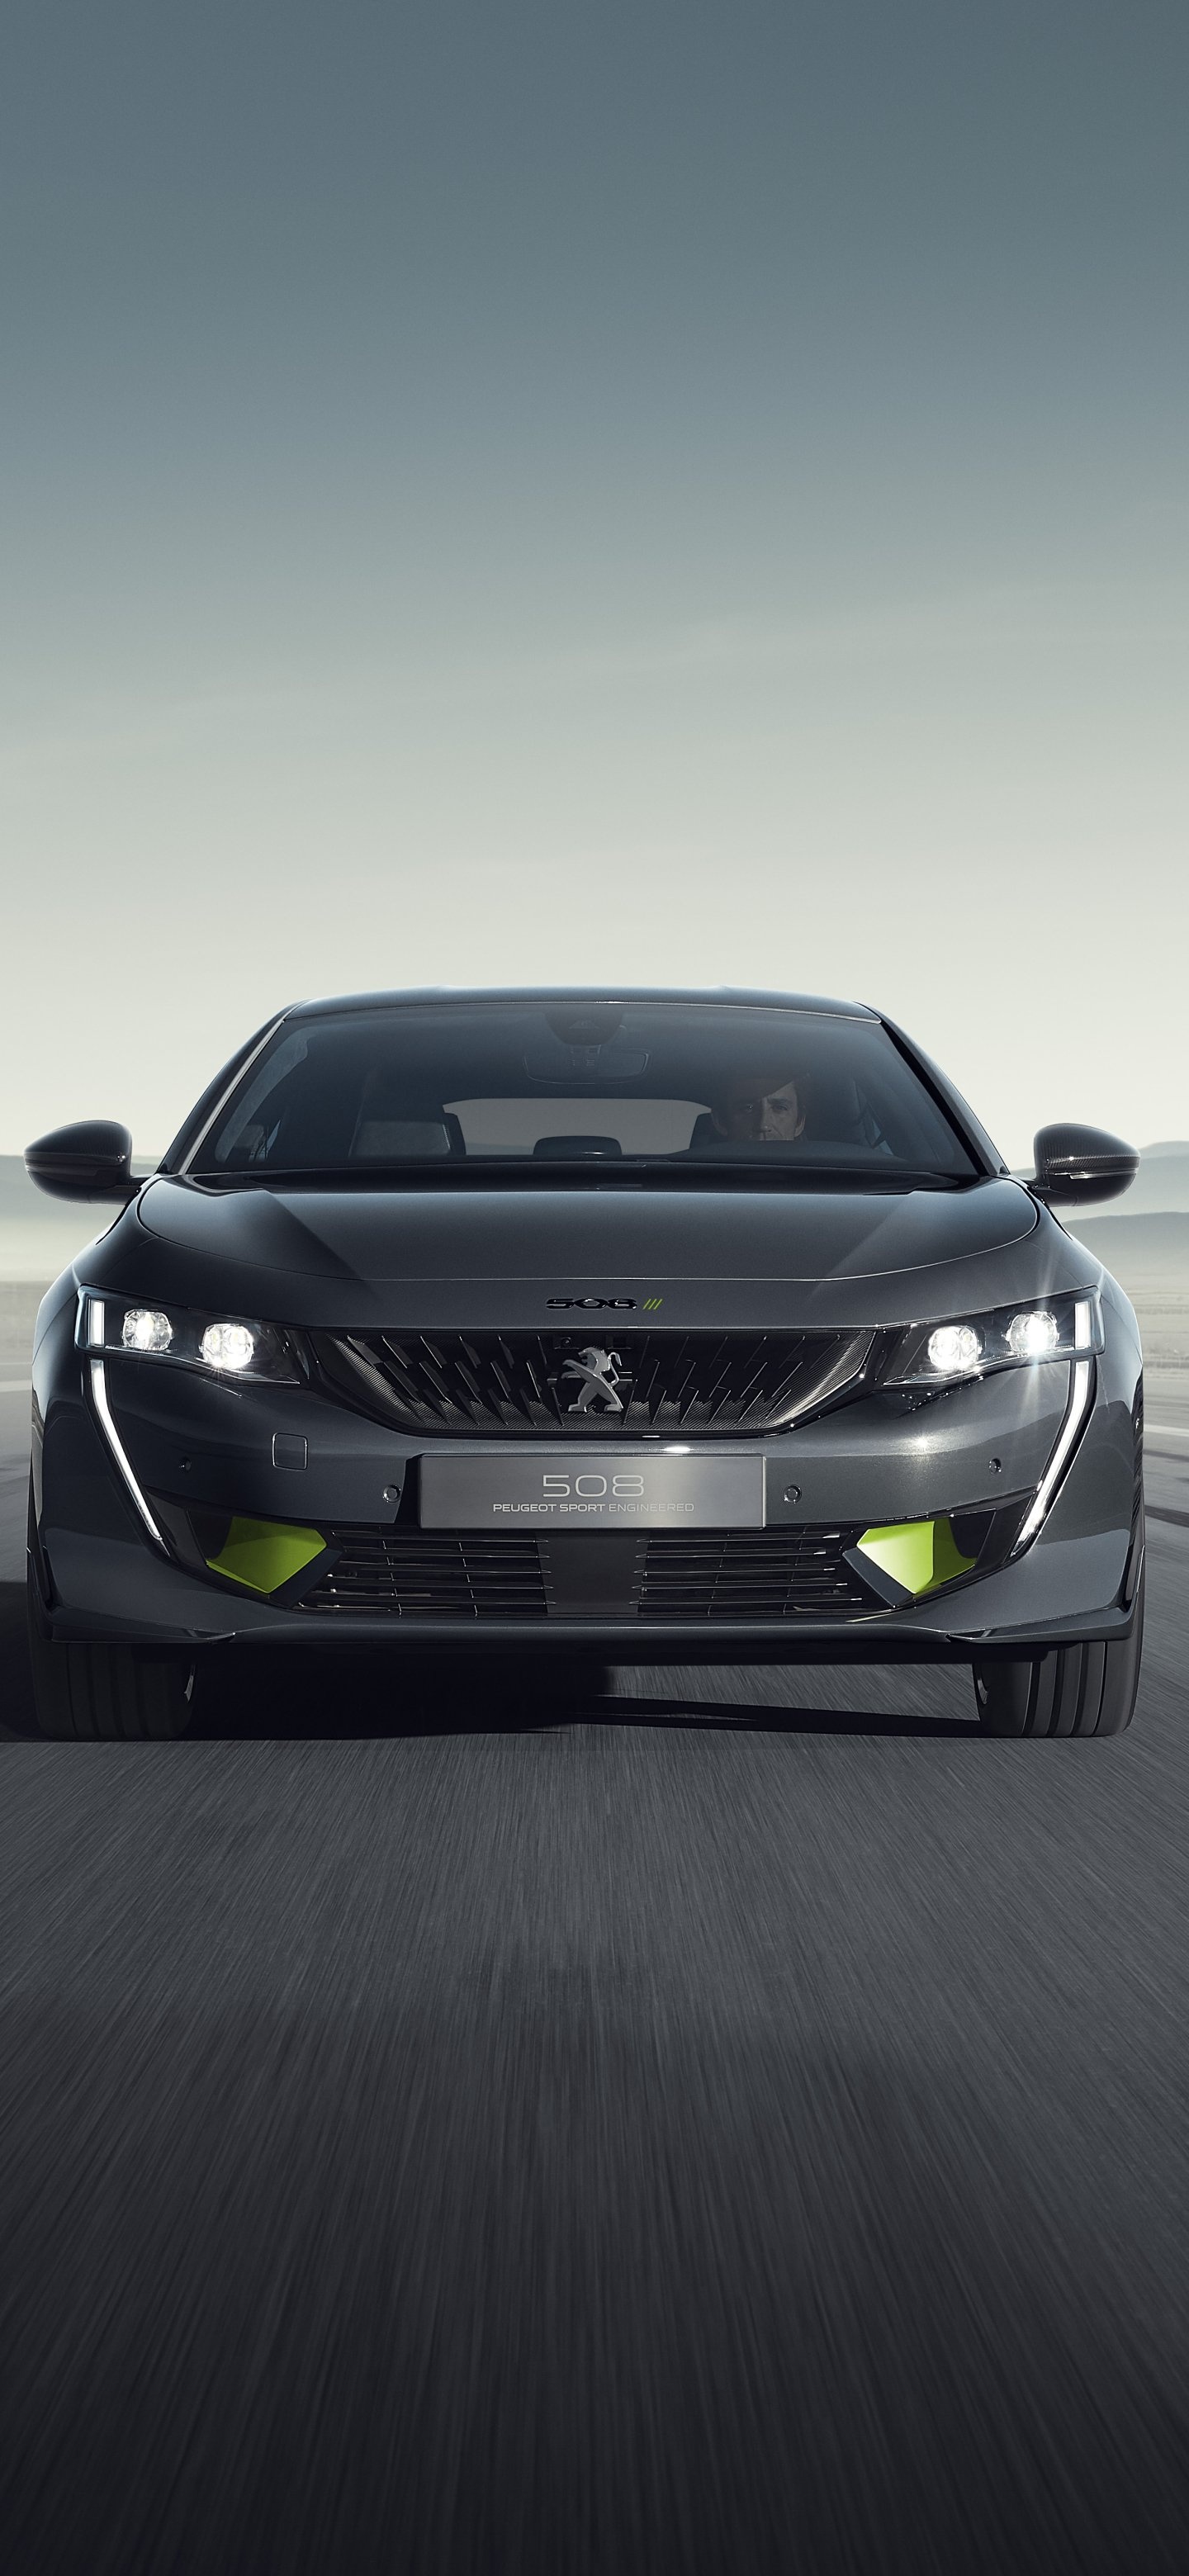 Peugeot 508, Stylish vehicle, Sophisticated design, Automotive excellence, 1440x3120 HD Phone